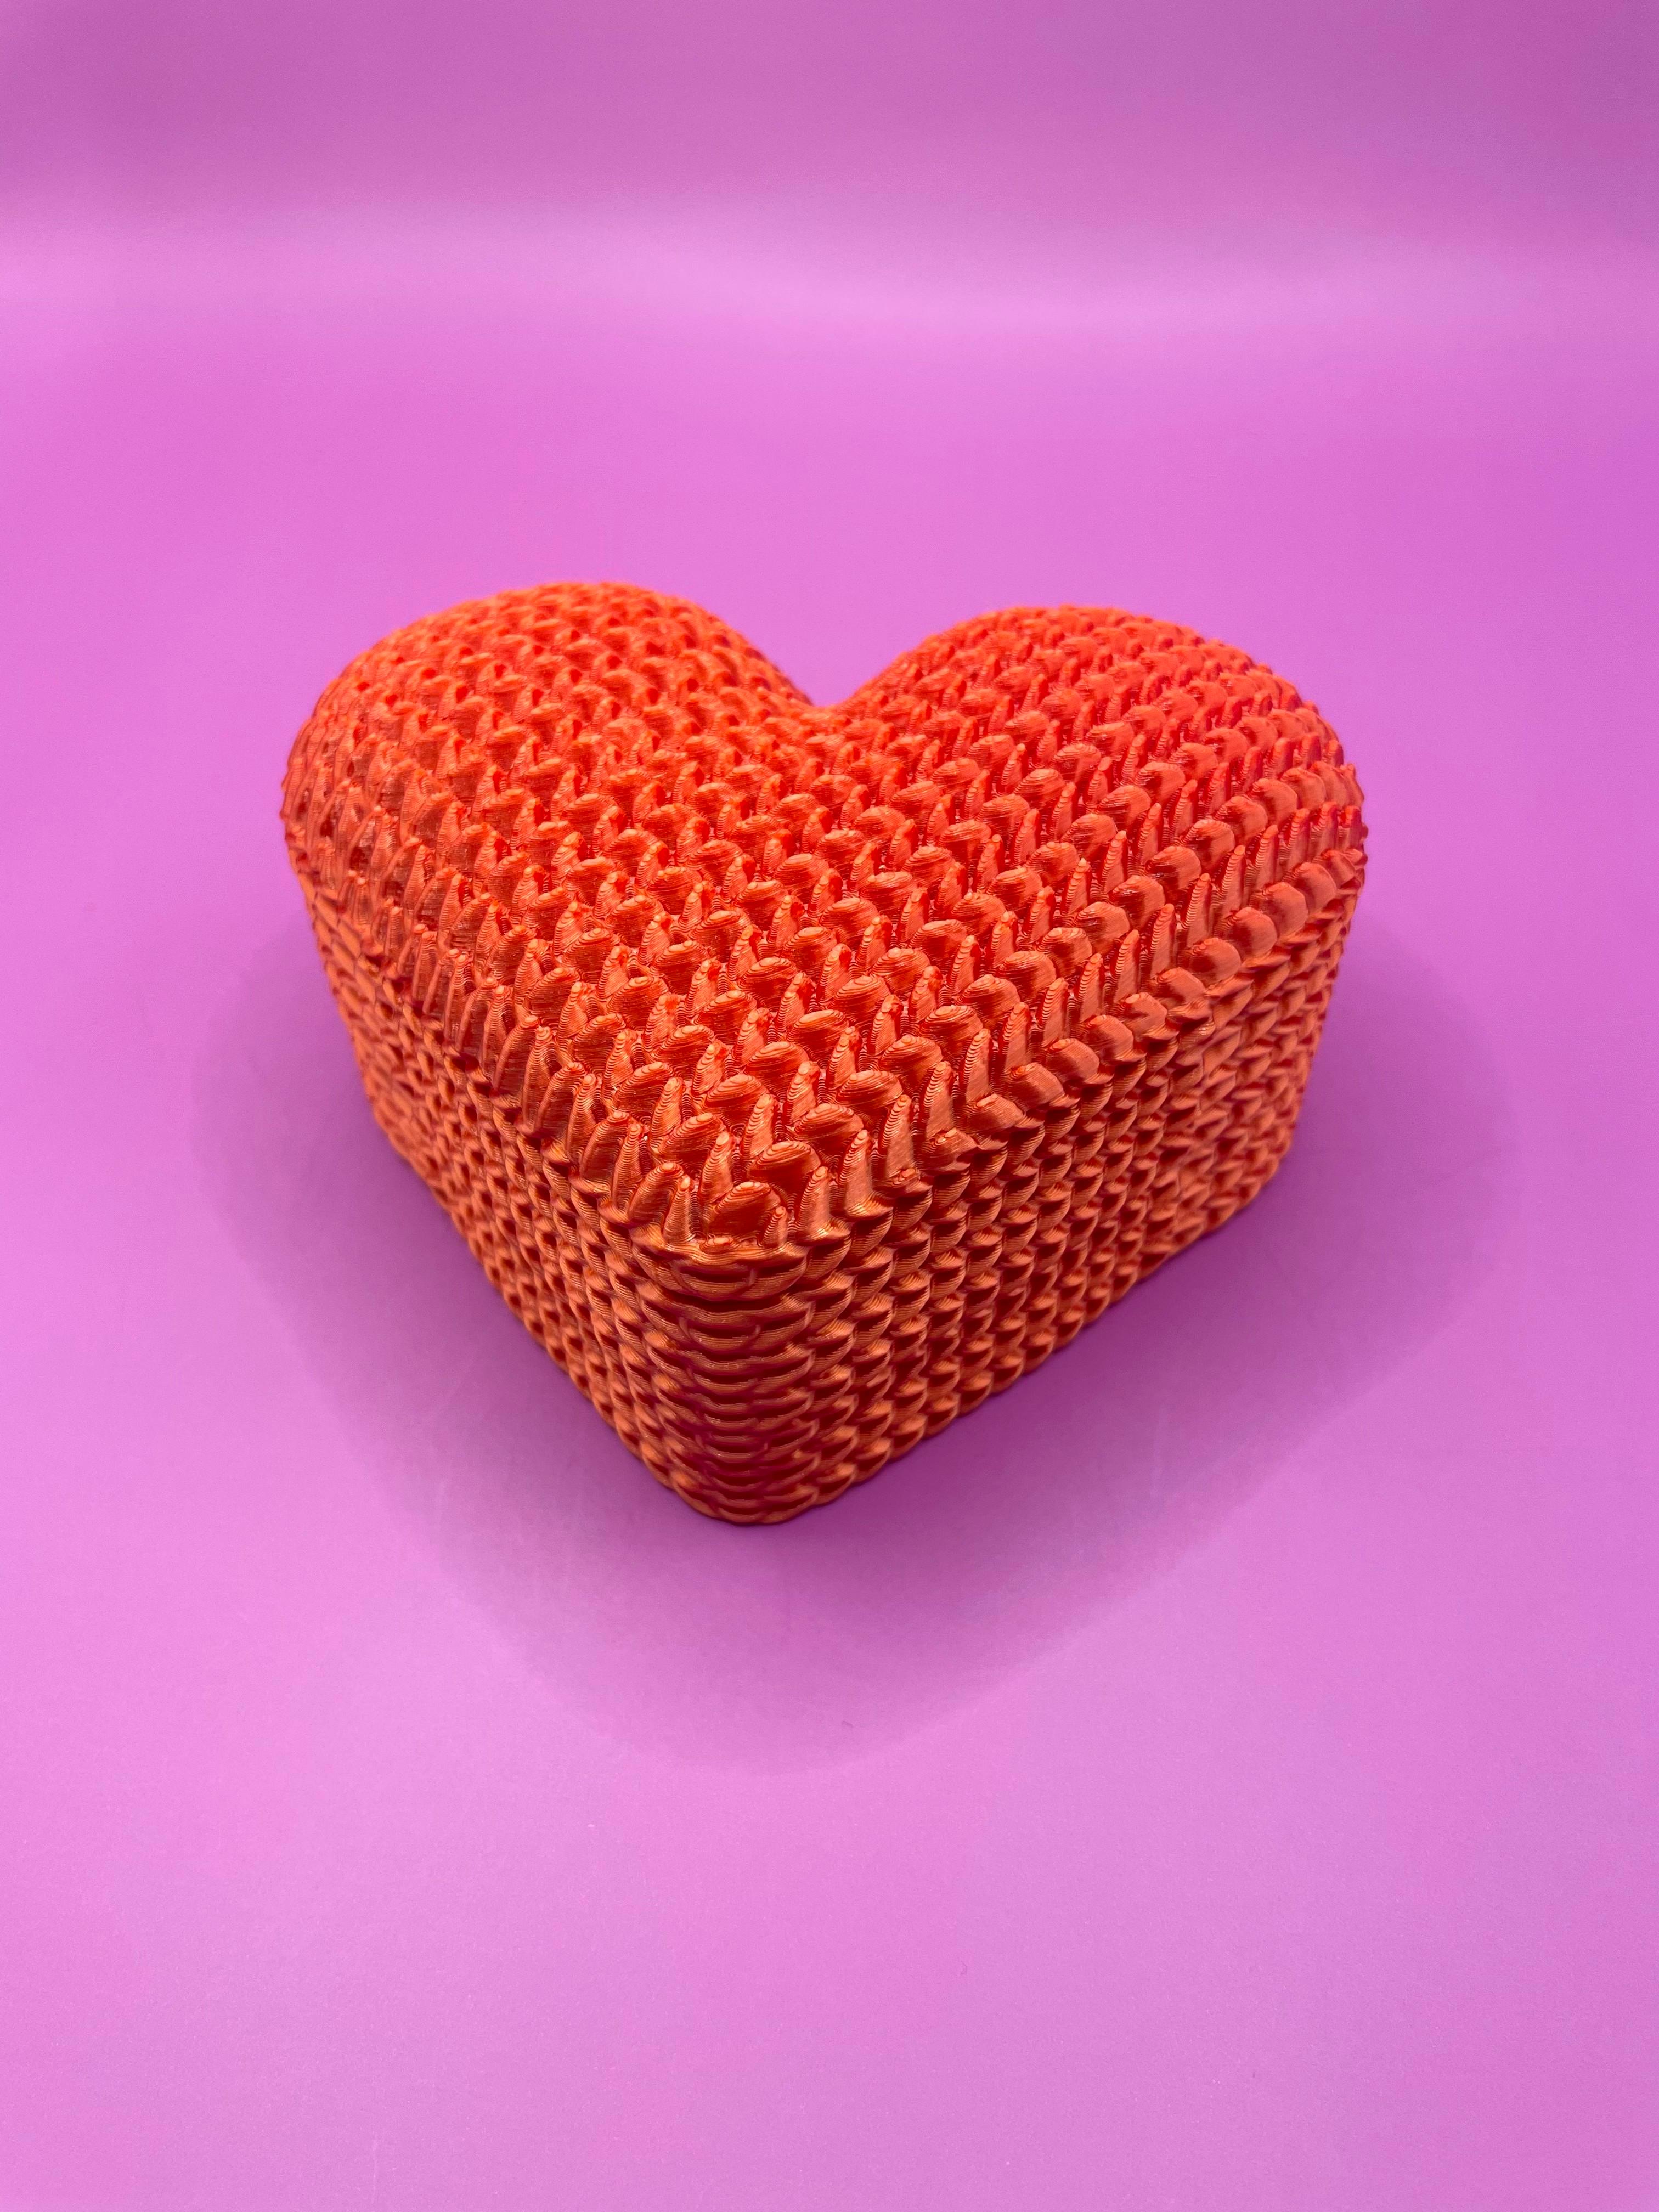 Knitted Heart Gift Box With Magnetic Lid  3d model